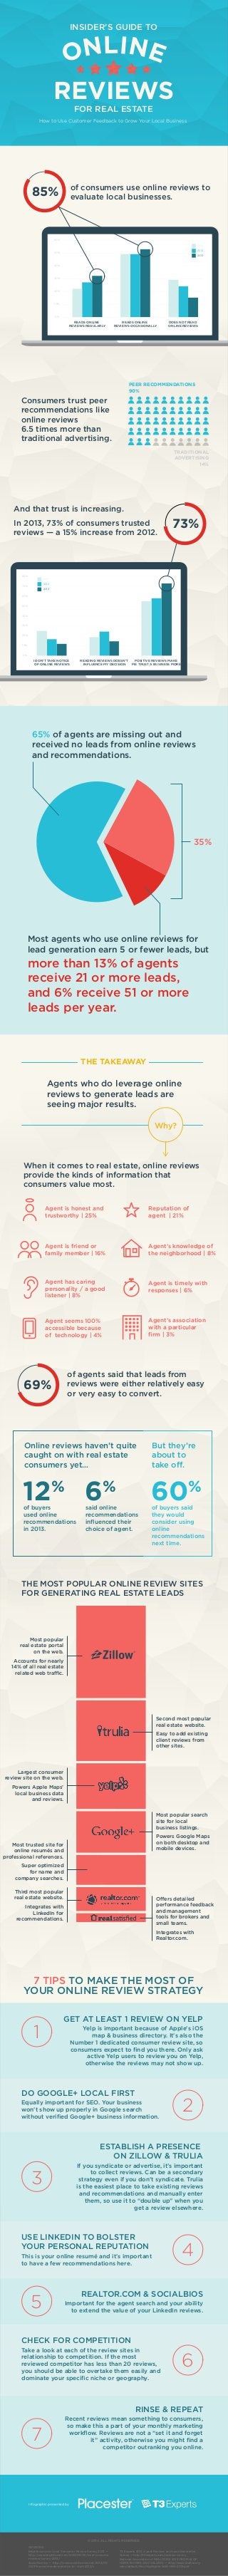 INSIDER’S GUIDE TO 
ONLINE 
REVIEWS 
FOR REAL ESTATE 
How to Use Customer Feedback to Grow Your Local Business 
85% 
60% 
50% 
40% 
30% 
20% 
10% 
TEXT OF AXIS 
Consumers trust peer 
recommendations like 
online reviews 
6.5 times more than 
traditional advertising. 
TRADITIONAL 
ADVERTISING 
14% 
PEER RECOMMENDATIONS 
90% 
0% 
DOES NOT READ 
ONLINE REVIEWS 
READS ONLINE 
REVIEWS OCCASIONALLY 
READS ONLINE 
REVIEWS REGULARLY 
2011 
2012 
2013 
80% 
70% 
60% 
50% 
40% 
30% 
20% 
10% 
0% 
2011 
2012 
2013 
POSITIVE REVIEWS MAKE 
ME TRUST A BUSINESS MORE 
PACING 
TEXT OF STAT 
READING REVIEWS DOESN’T 
INFLUENCE MY DECISION 
I DON’T TAKE NOTICE 
OF ONLINE REVIEWS 
of consumers use online reviews to 
evaluate local businesses. 
73% 
And that trust is increasing. 
In 2013, 73% of consumers trusted 
reviews — a 15% increase from 2012. 
65% of agents are missing out and 
received no leads from online reviews 
and recommendations. 
COMBINED CHARTS 
Most agents who use online reviews for 
lead generation earn 5 or fewer leads, but 
more than 13% of agents 
receive 21 or more leads, 
and 6% receive 51 or more 
leads per year. 
THE TAKEAWAY 
Agents who do leverage online 
reviews to generate leads are 
seeing major results. 
35% 
Why? 
When it comes to real estate, online reviews 
provide the kinds of information that 
consumers value most. 
Agent is honest and 
trustworthy | 25% 
Reputation of 
agent | 21% 
Agent is friend or 
family member | 16% 
Agent’s knowledge of 
the neighborhood | 8% 
Agent has caring 
personality / a good 
listener | 8% 
Agent is timely with 
responses | 6% 
Agent seems 100% 
accessible because 
of technology | 4% 
Agent’s association 
with a particular 
firm | 3% 
of agents said that leads from 
reviews were either relatively easy 
or very easy to convert. 
69% 
Online reviews haven’t quite 
caught on with real estate 
consumers yet… 
But they’re 
about to 
take o. 
12% 
of buyers 
used online 
recommendations 
in 2013. 
6% 
said online 
recommendations 
influenced their 
choice of agent. 
60% 
of buyers said 
they would 
consider using 
online 
recommendations 
next time. 
THE MOST POPULAR ONLINE REVIEW SITES 
FOR GENERATING REAL ESTATE LEADS 
7 TIPS TO MAKE THE MOST OF 
YOUR ONLINE REVIEW STRATEGY 
Yelp is important because of Apple's iOS 
map  business directory. It's also the 
Number 1 dedicated consumer review site, so 
consumers expect to find you there. Only ask 
active Yelp users to review you on Yelp, 
otherwise the reviews may not show up. 
DO GOOGLE+ LOCAL FIRST 
Equally important for SEO. Your business 
won't show up properly in Google search 
without verified Google+ business information. 
If you syndicate or advertise, it’s important 
to collect reviews. Can be a secondary 
strategy even if you don’t syndicate. Trulia 
is the easiest place to take existing reviews 
and recommendations and manually enter 
them, so use it to “double up” when you 
get a review elsewhere. 
USE LINKEDIN TO BOLSTER 
YOUR PERSONAL REPUTATION 
This is your online resumé and it's important 
to have a few recommendations here. 
Important for the agent search and your ability 
to extend the value of your LinkedIn reviews. 
CHECK FOR COMPETITION 
Take a look at each of the review sites in 
relationship to competition. If the most 
reviewed competitor has less than 20 reviews, 
you should be able to overtake them easily and 
dominate your specific niche or geography. 
SOURCES: 
Brightlocal.com Local Consumer Review Survey 2013 — 
http://www.brightlocal.com/2013/06/25/local-consume 
r-review-survey-2013/ 
SocialNomics — http://www.socialnomics.net/2012/01/ 
04/39-social-media-statistics-to- start-2012/v 
T3 Experts 2014 Agent Reviews and Lead Generation 
Survey — http://t3experts.com/reviews-survey 
National Association of REALTORS® 2013 PROFILE OF 
HOME BUYERS AND SELLERS — http://www.realtor.org 
sites/default/files/Highlights-NAR-HBS-2013.pdf 
Most popular 
real estate portal 
on the web. 
Accounts for nearly 
14% of all real estate 
related web trac. 
Second most popular 
real estate website. 
Easy to add existing 
client reviews from 
other sites. 
Most popular search 
site for local 
business listings. 
Powers Google Maps 
on both desktop and 
mobile devices. 
Most trusted site for 
online resumés and 
professional references. 
Super optimized 
for name and 
company searches. 
Third most popular 
real estate website. 
Integrates with 
LinkedIn for 
recommendations. 
Oers detailed 
performance feedback 
and management 
tools for brokers and 
small teams. 
Integrates with 
Realtor.com. 
Largest consumer 
review site on the web. 
Powers Apple Maps’ 
local business data 
and reviews. 
2 
4 
6 
1 
3 
5 
7 
GET AT LEAST 1 REVIEW ON YELP 
ESTABLISH A PRESENCE 
ON ZILLOW  TRULIA 
REALTOR.COM  SOCIALBIOS 
RINSE  REPEAT 
Recent reviews mean something to consumers, 
so make this a part of your monthly marketing 
workflow. Reviews are not a “set it and forget 
it” activity, otherwise you might find a 
competitor outranking you online. 
Infographic presented by 
© 2014. ALL RIGHTS RESERVED. 
TEXT OF AXIS 
OMITTED  CHANGED TEXT 
OMITTED  CHANGED TEXT 
OMITTED CHART DETAILS 
